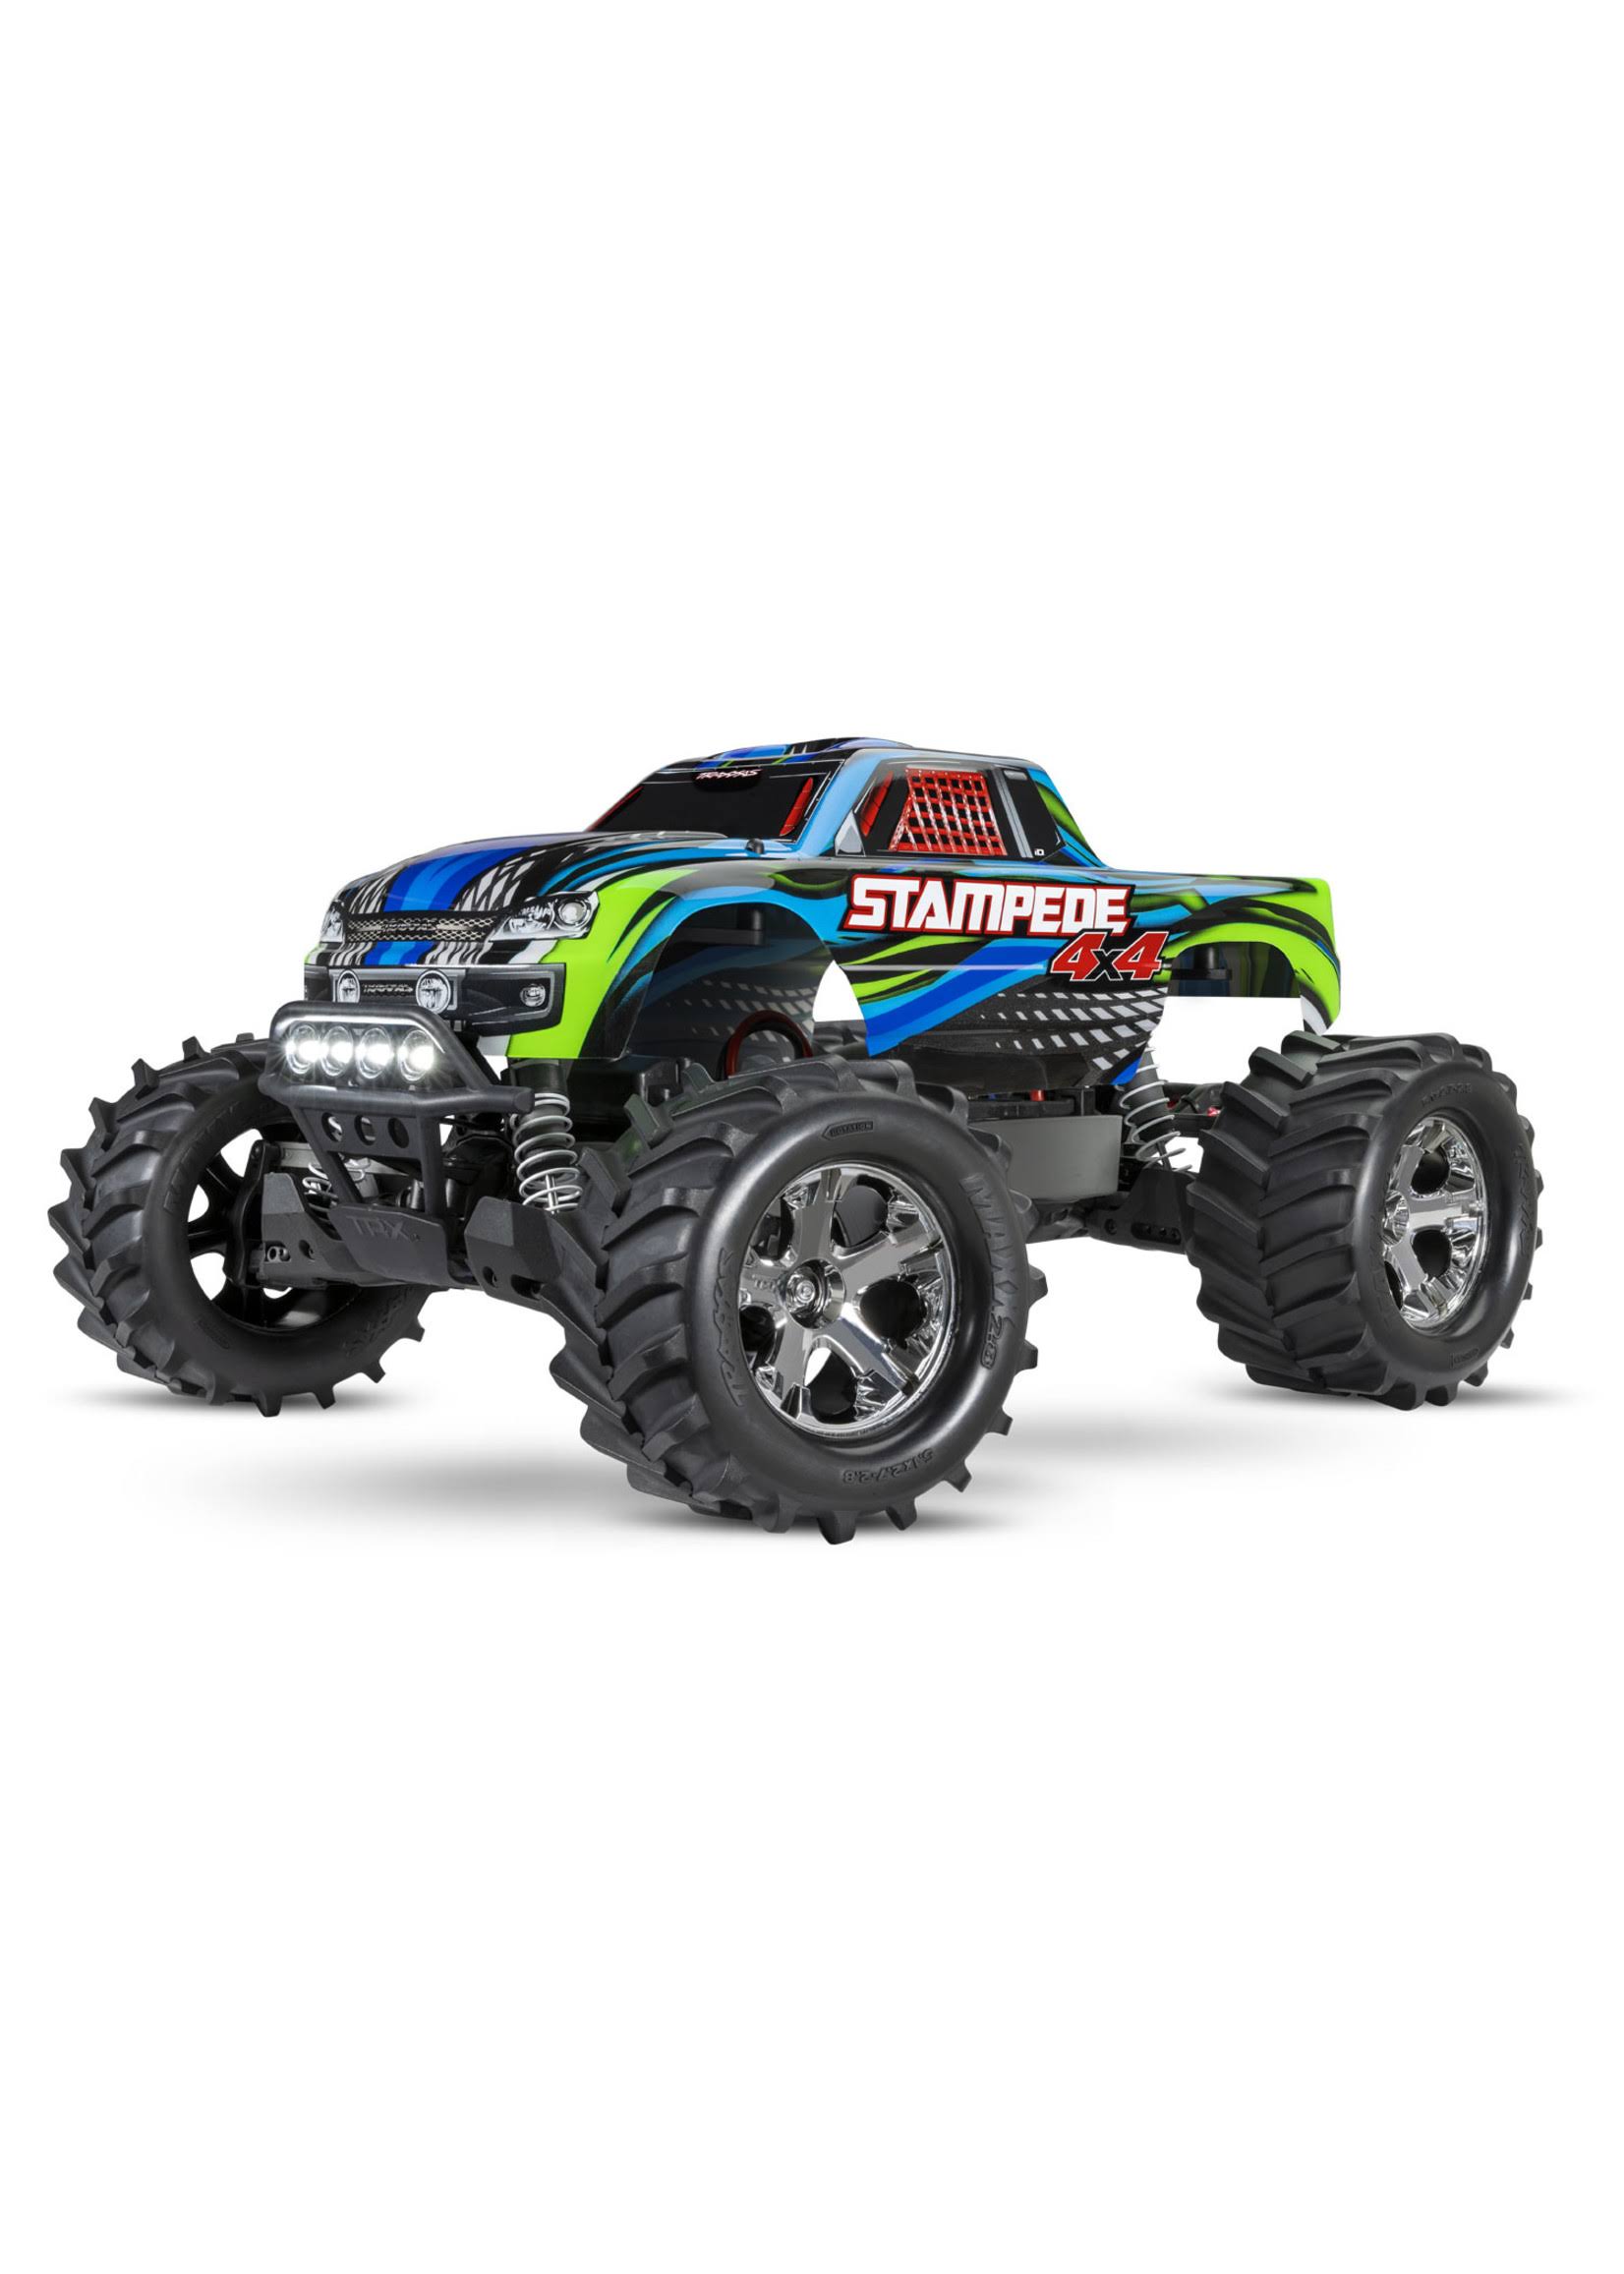 Traxxas 1/10 Stampede 4x4 with LED Lights Blue